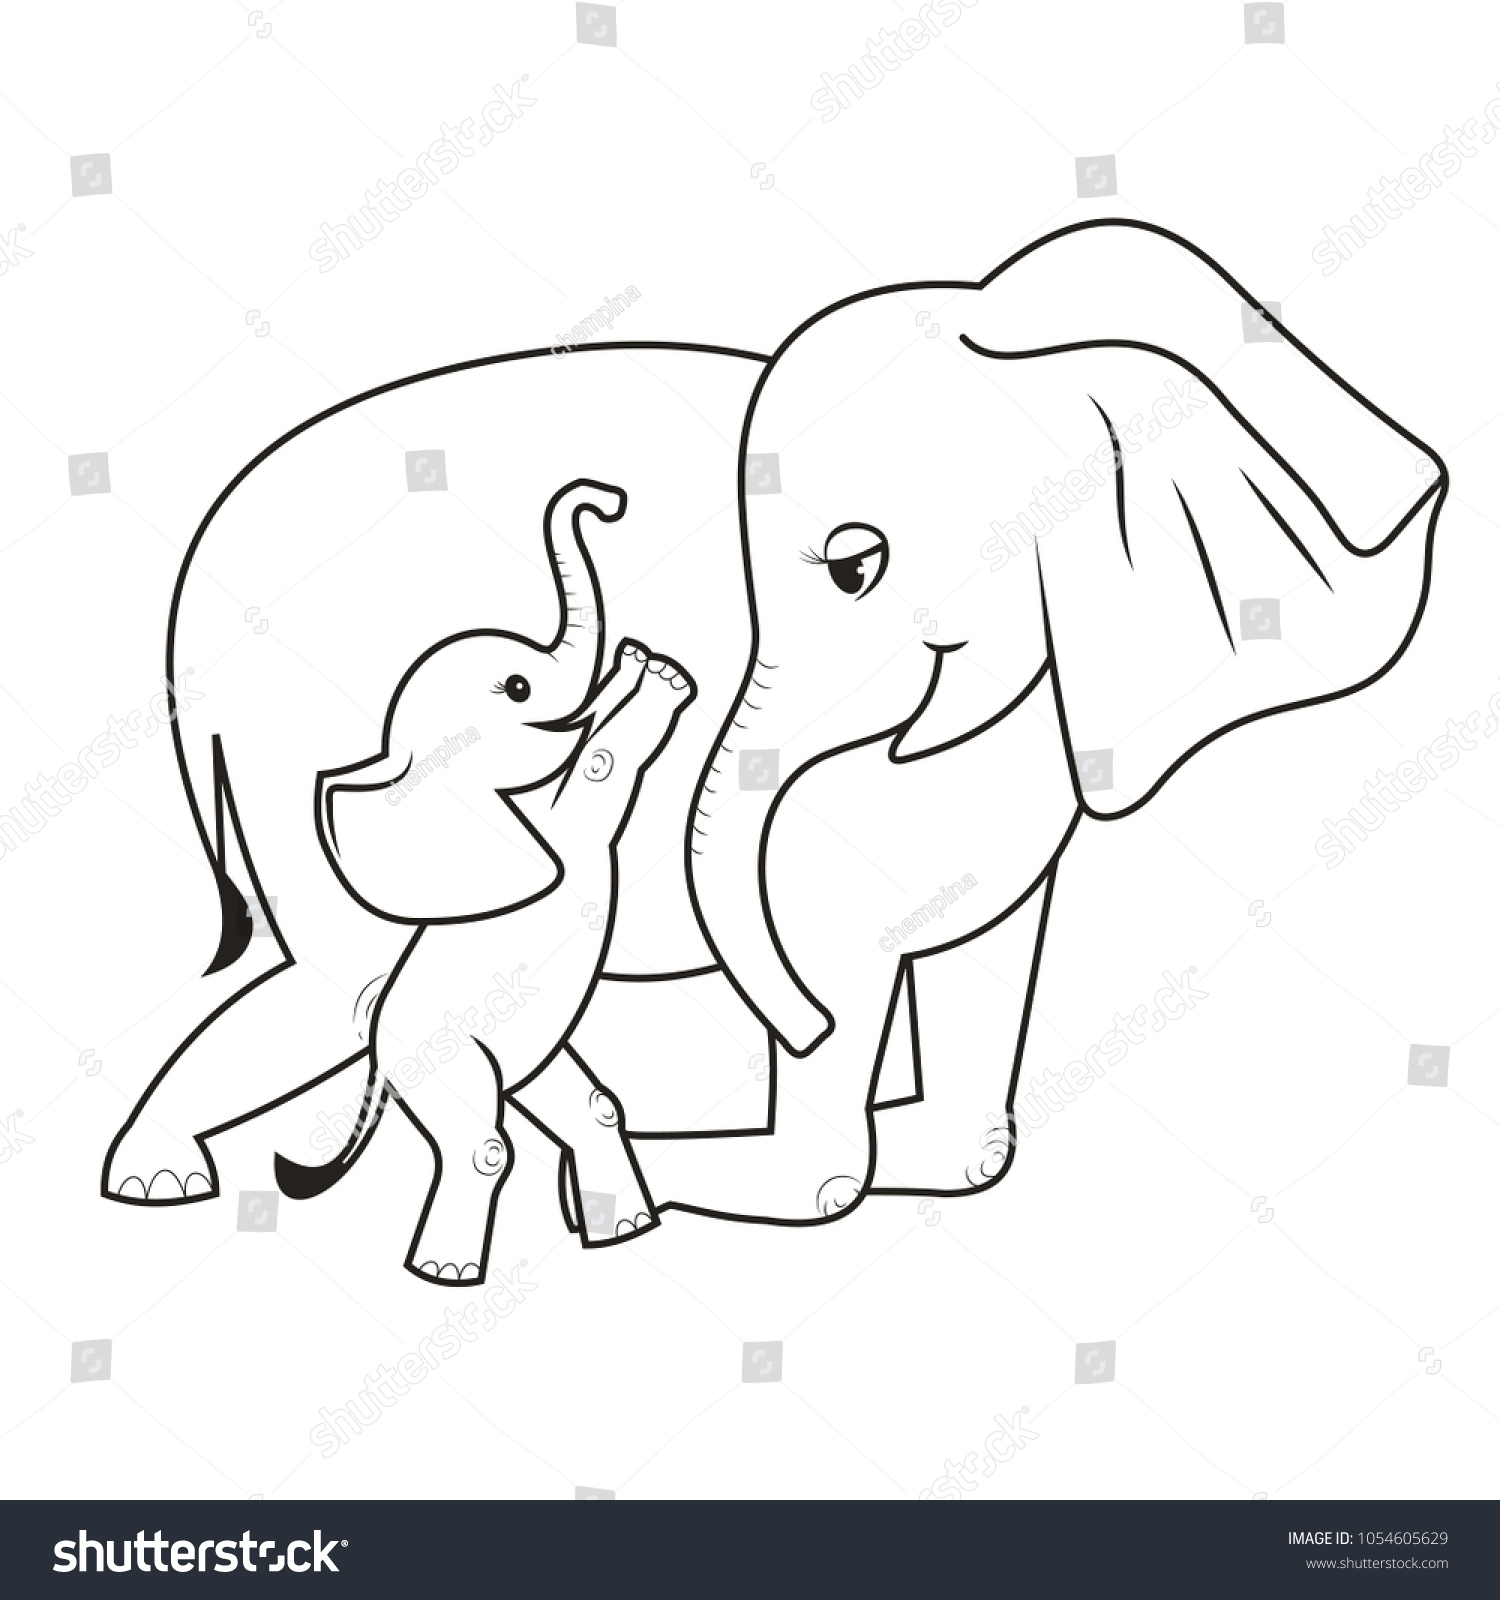 Mom Elephant Baby Elephantcoloring Book Pages Stock Vector Royalty Free 1054605629